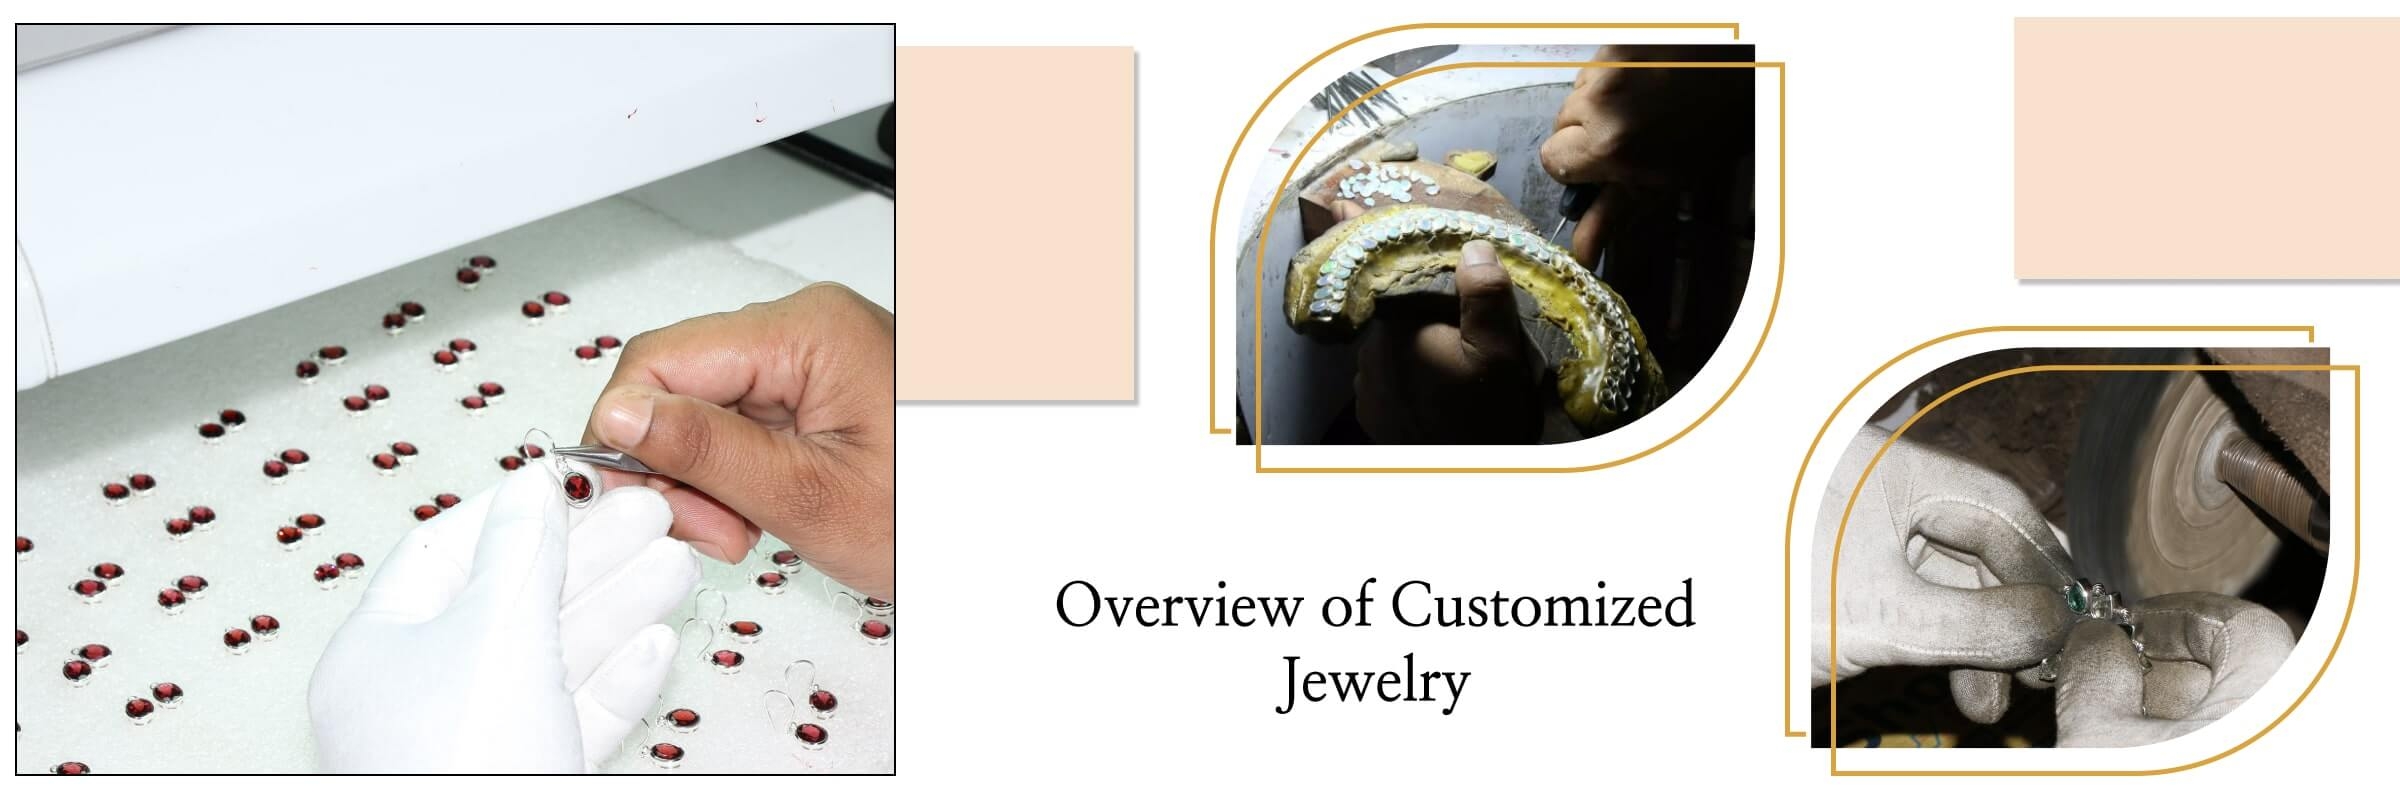 An Overview of Customized Jewelry In India 1